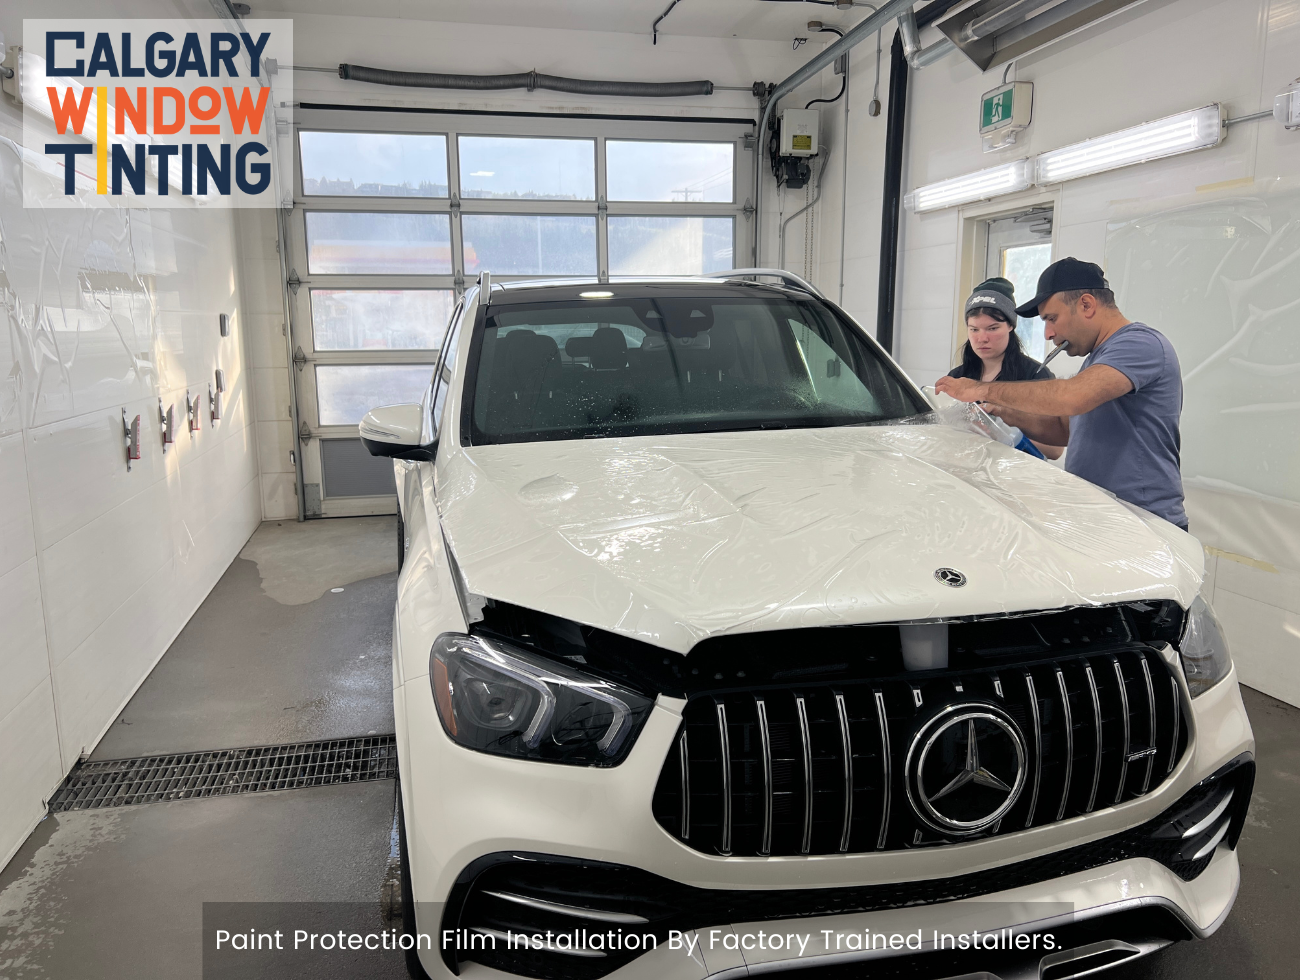 Paint protection film installation by Calgary Window Tinting.